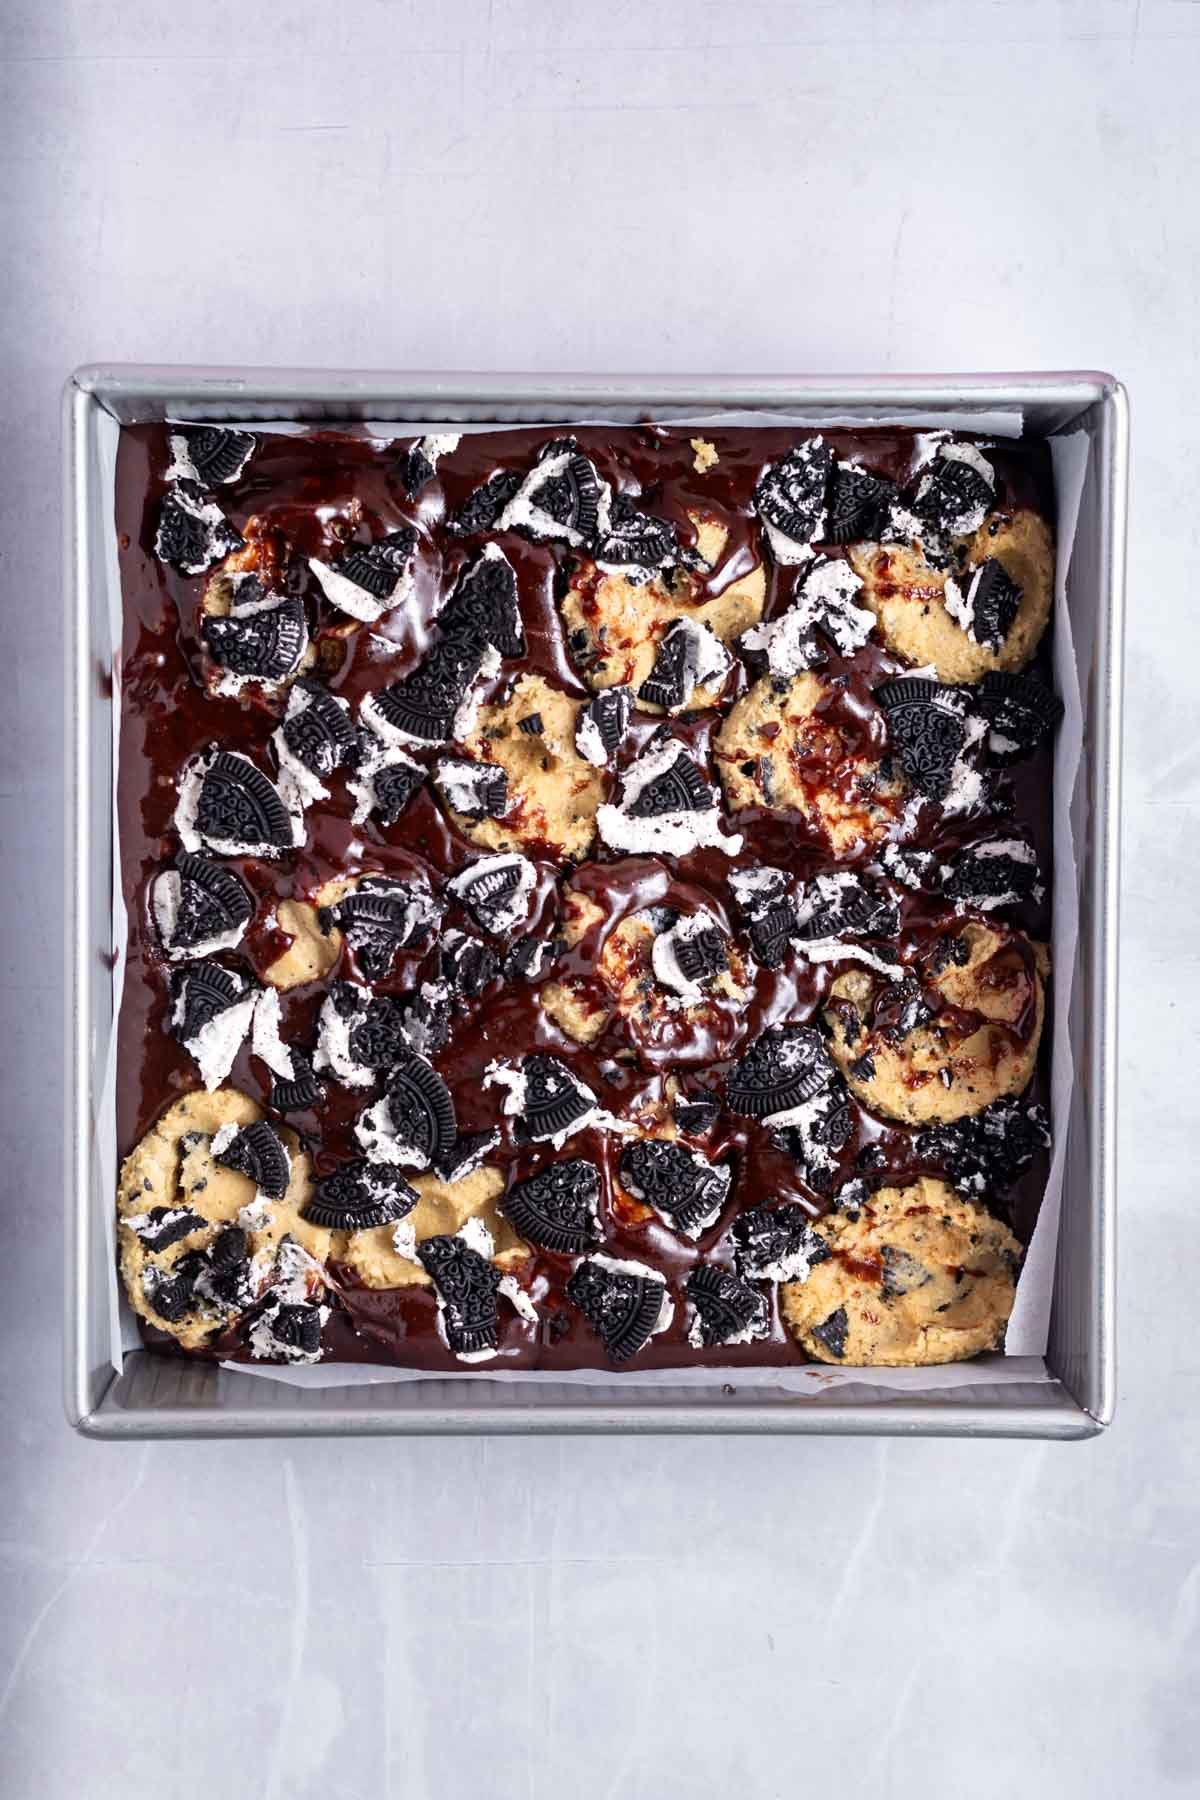 oreo brookie batter in a baking tin before baking